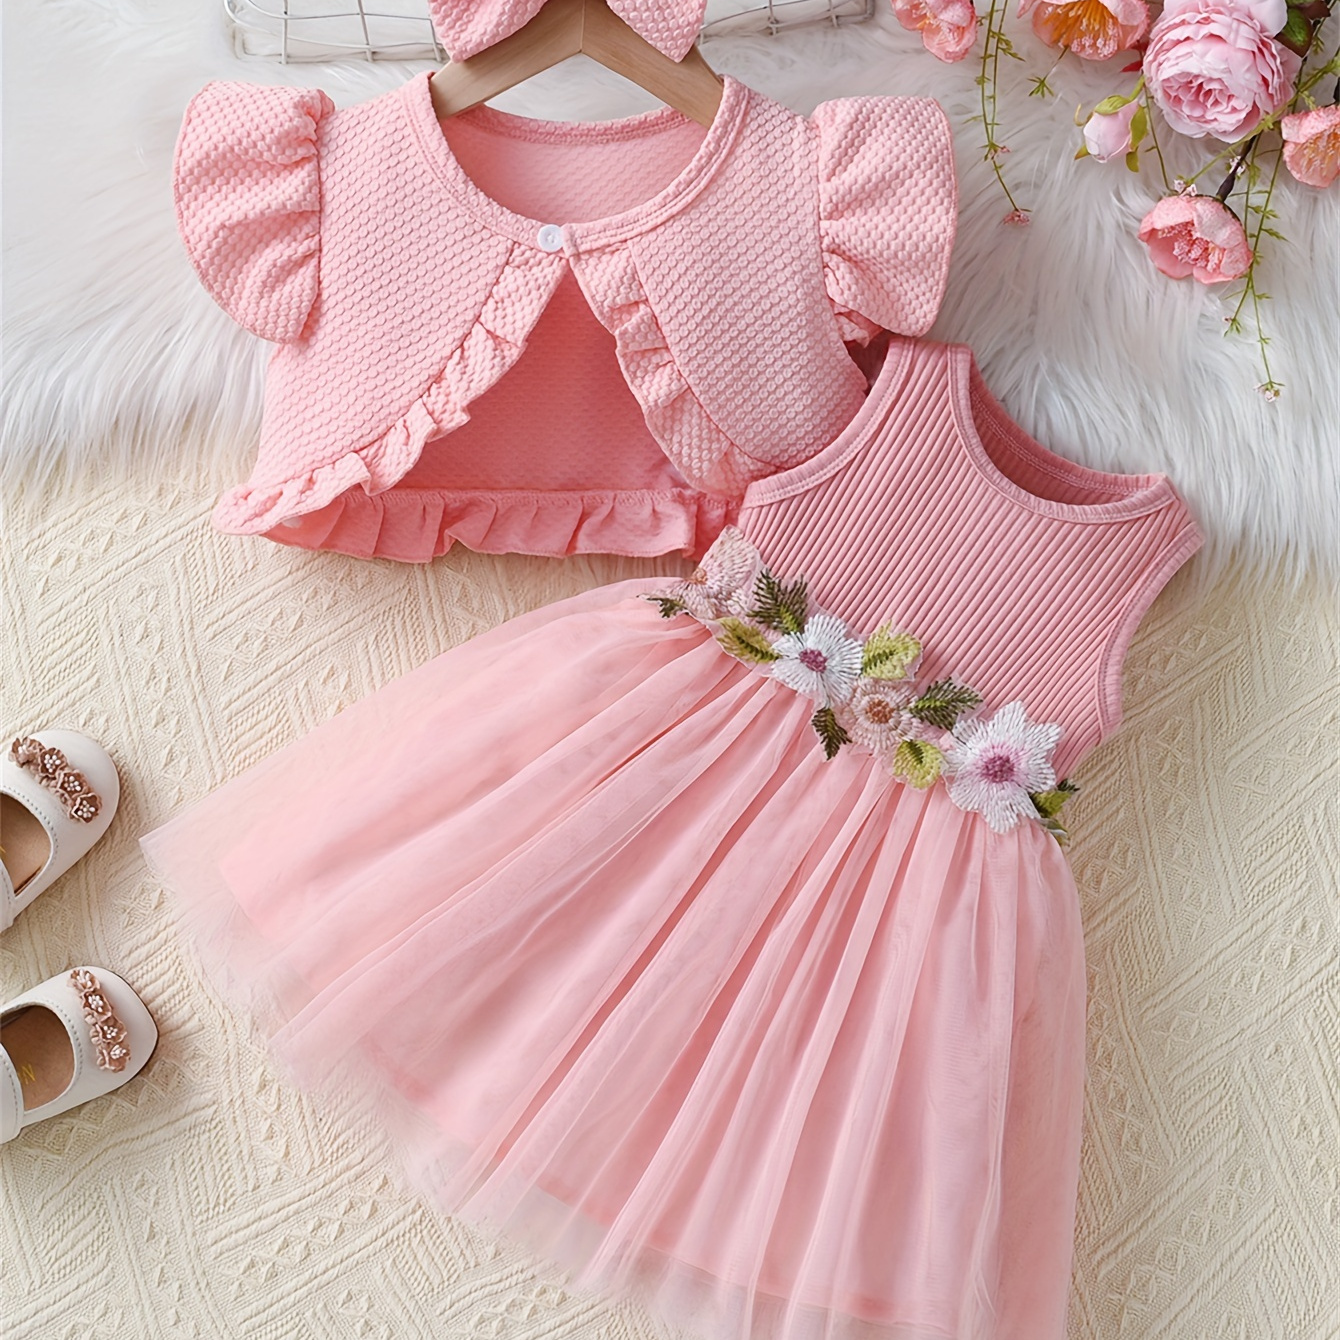 

Baby's Elegant Flower Embroidered 2pcs Summer Outfit, Cardigan & Mesh Splicing Sleeveless Dress Set, Toddler & Infant Girl's Clothes For Daily/holiday, As Gift